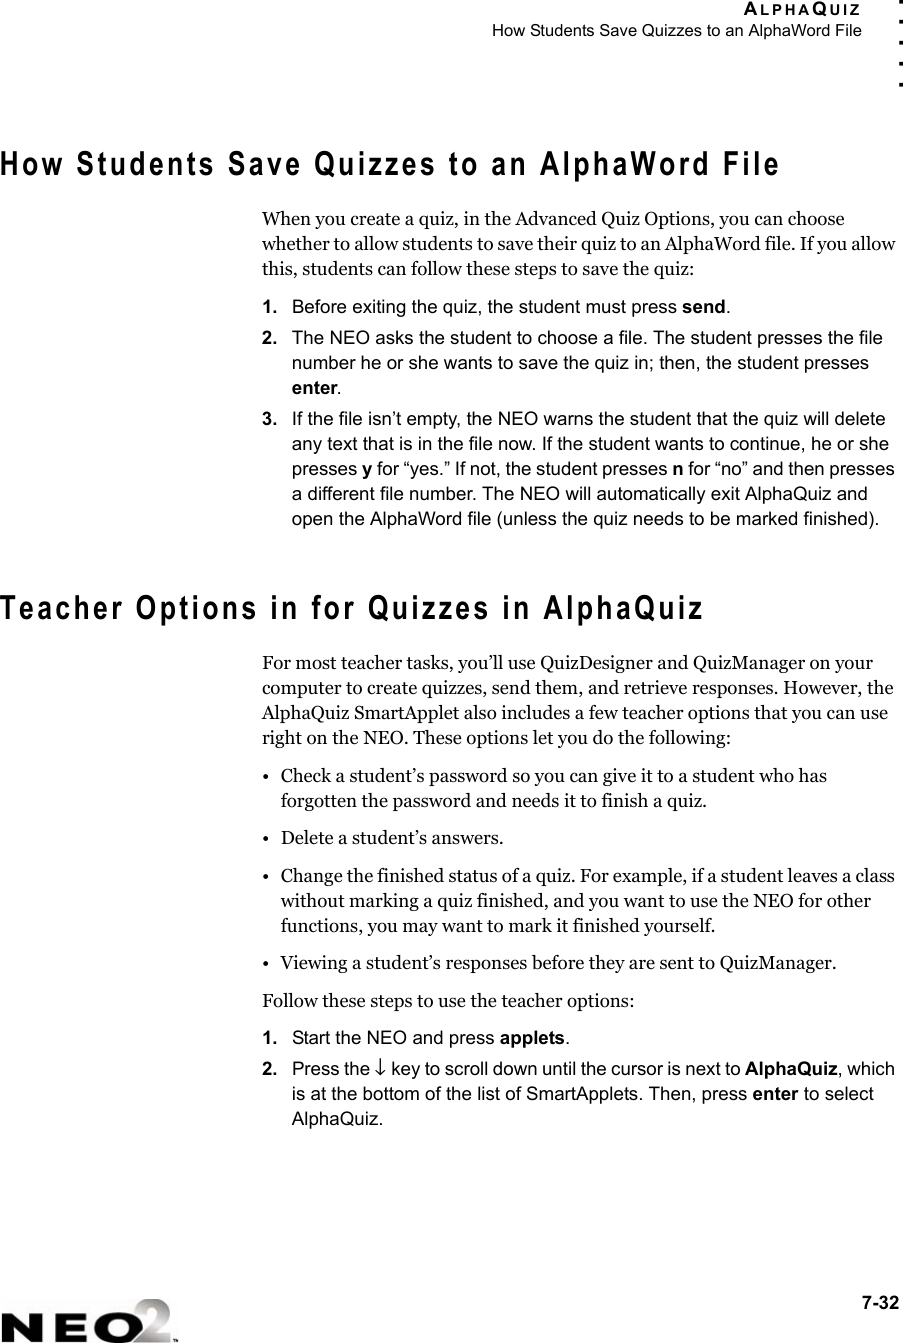 ALPHAQUIZHow Students Save Quizzes to an AlphaWord File7-32. . . . .How Students Save Quizzes to an AlphaWord FileWhen you create a quiz, in the Advanced Quiz Options, you can choose whether to allow students to save their quiz to an AlphaWord file. If you allow this, students can follow these steps to save the quiz:1. Before exiting the quiz, the student must press send.2. The NEO asks the student to choose a file. The student presses the file number he or she wants to save the quiz in; then, the student presses enter.3. If the file isn’t empty, the NEO warns the student that the quiz will delete any text that is in the file now. If the student wants to continue, he or she presses y for “yes.” If not, the student presses n for “no” and then presses a different file number. The NEO will automatically exit AlphaQuiz and open the AlphaWord file (unless the quiz needs to be marked finished).Teacher Options in for Quizzes in AlphaQuizFor most teacher tasks, you’ll use QuizDesigner and QuizManager on your computer to create quizzes, send them, and retrieve responses. However, the AlphaQuiz SmartApplet also includes a few teacher options that you can use right on the NEO. These options let you do the following:• Check a student’s password so you can give it to a student who has forgotten the password and needs it to finish a quiz.• Delete a student’s answers.• Change the finished status of a quiz. For example, if a student leaves a class without marking a quiz finished, and you want to use the NEO for other functions, you may want to mark it finished yourself.• Viewing a student’s responses before they are sent to QuizManager.Follow these steps to use the teacher options:1. Start the NEO and press applets.2. Press the ↓ key to scroll down until the cursor is next to AlphaQuiz, which is at the bottom of the list of SmartApplets. Then, press enter to select AlphaQuiz.